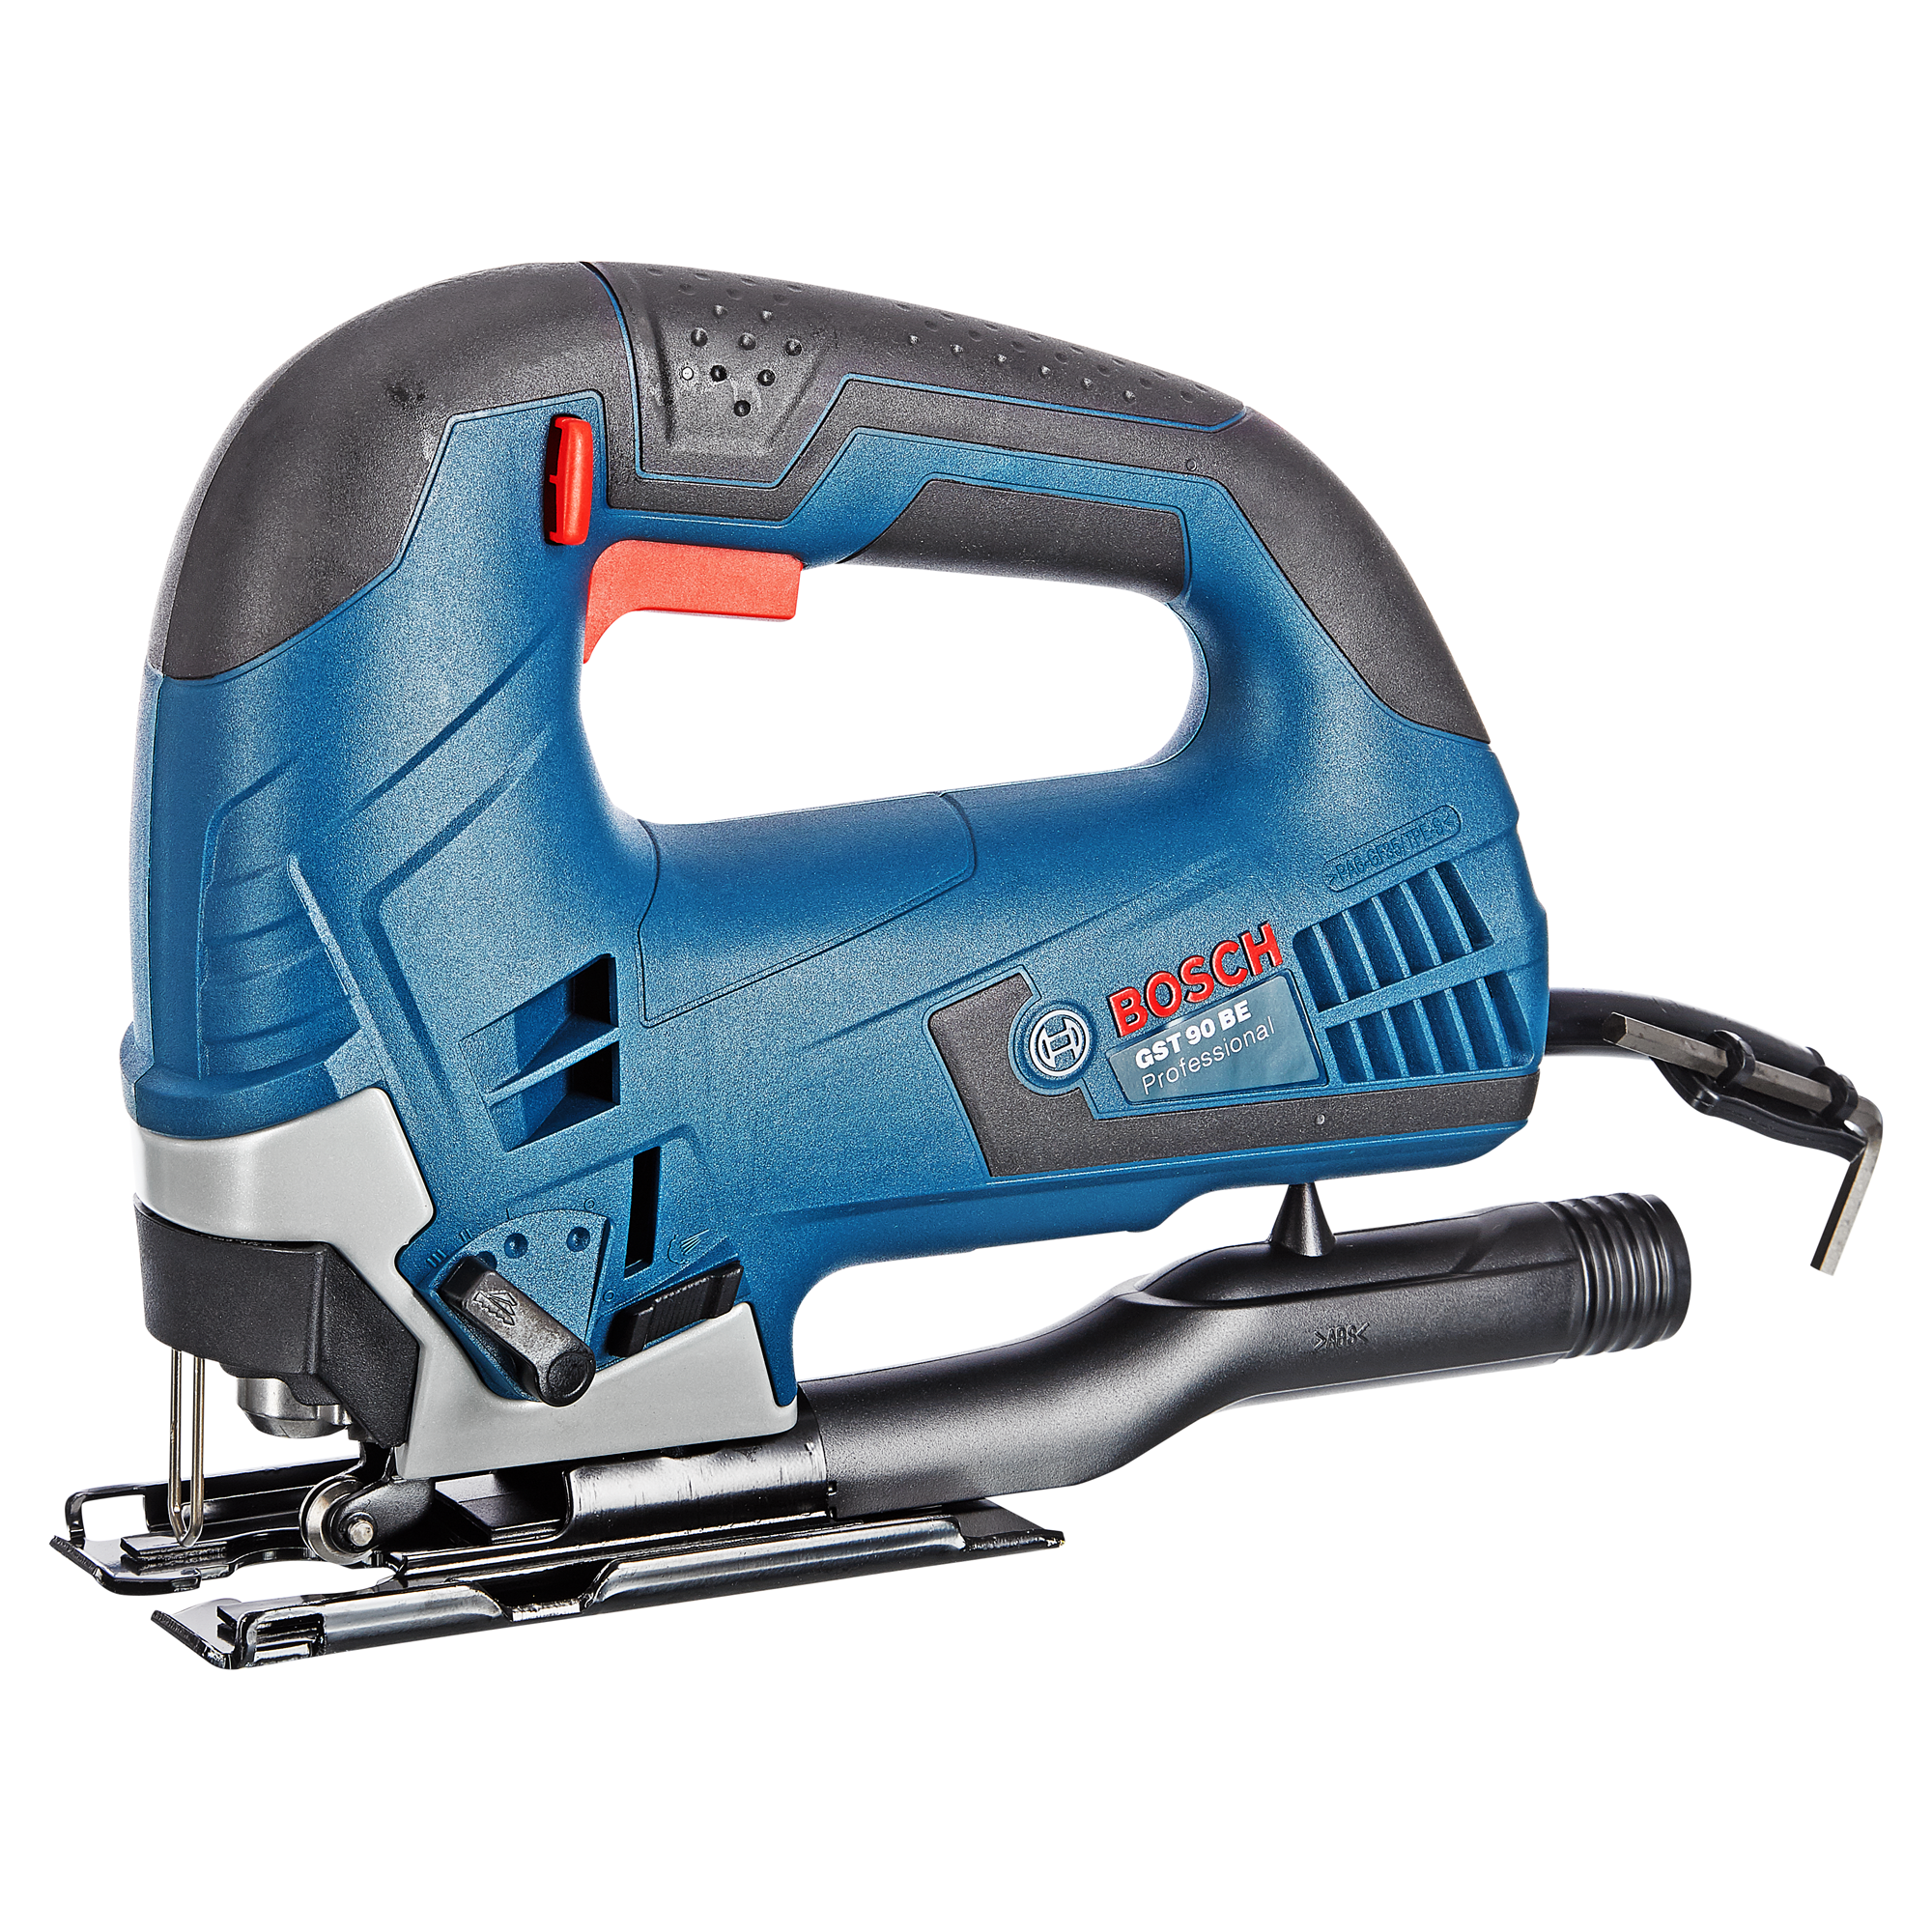 Stichsäge 'Professional GST 90 BE' blau 650 W, inkl. Transportkoffer + product picture